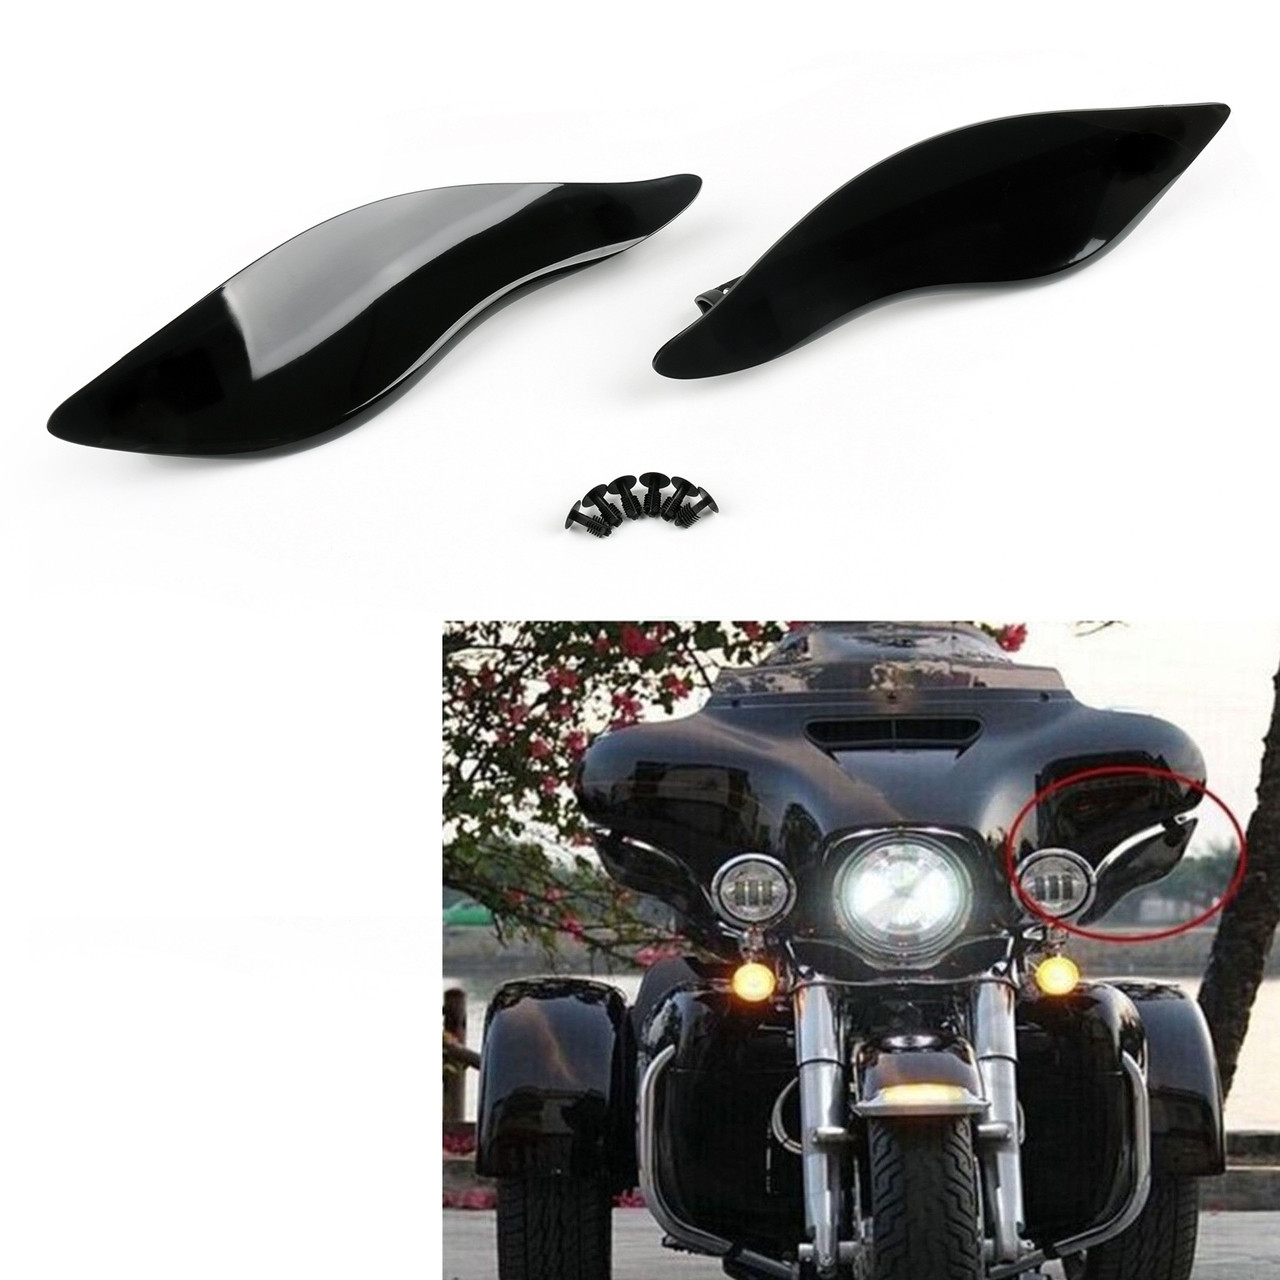 2 x ABS Plastic Side Wings Air Deflectors For Harley Street Electra Glide 14-17